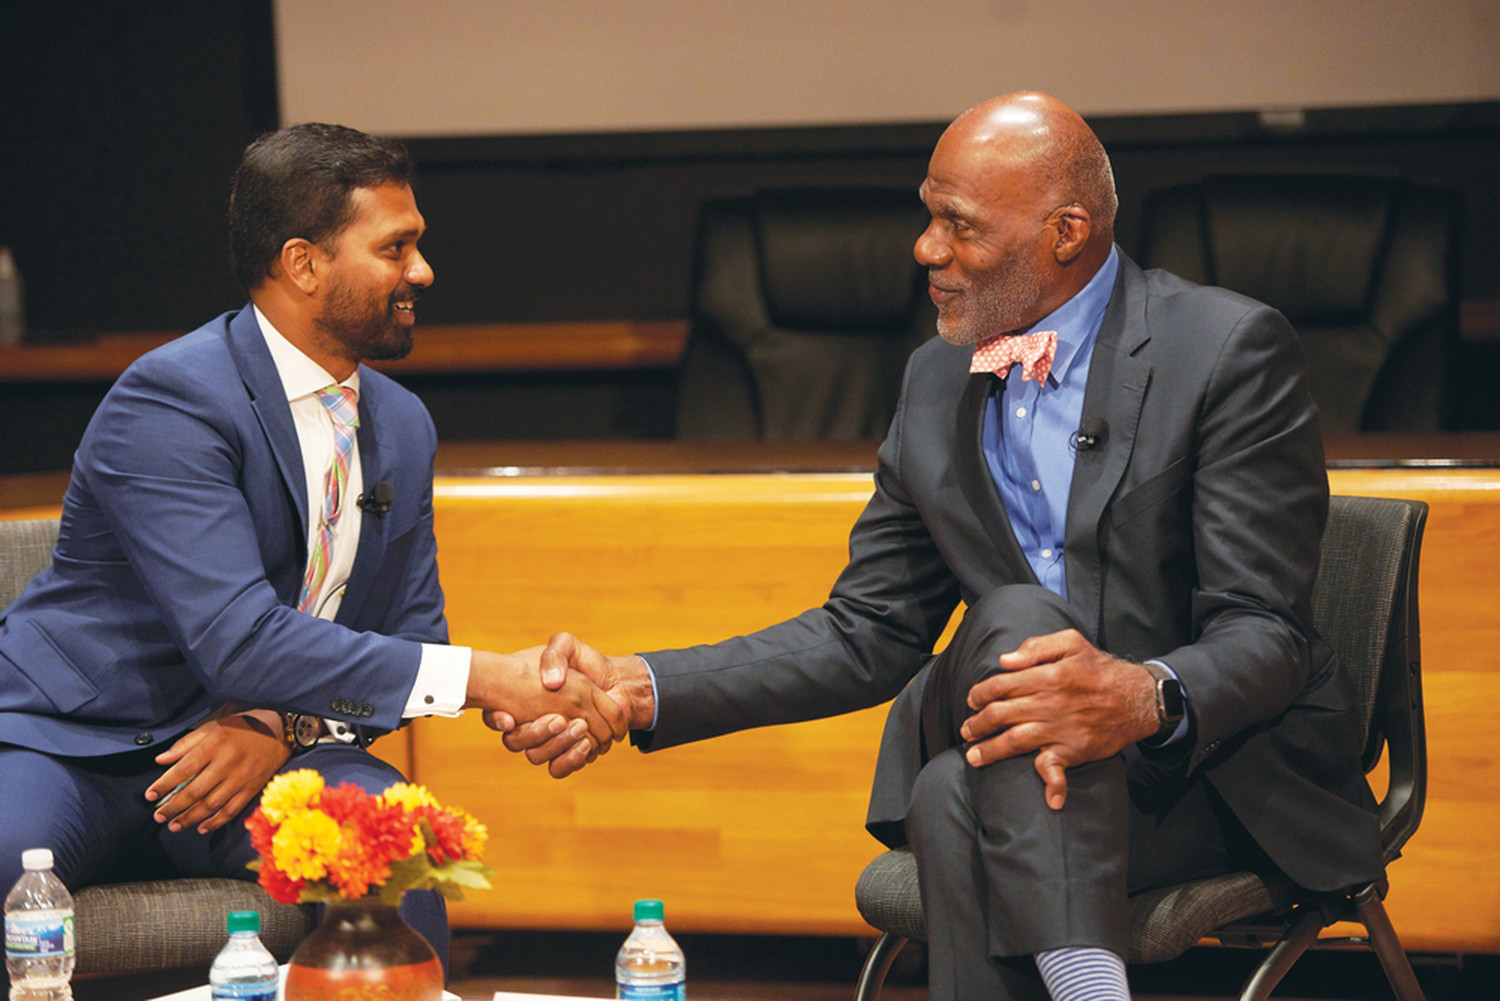 Justice Alan Page ’78 Featured at MLK Event